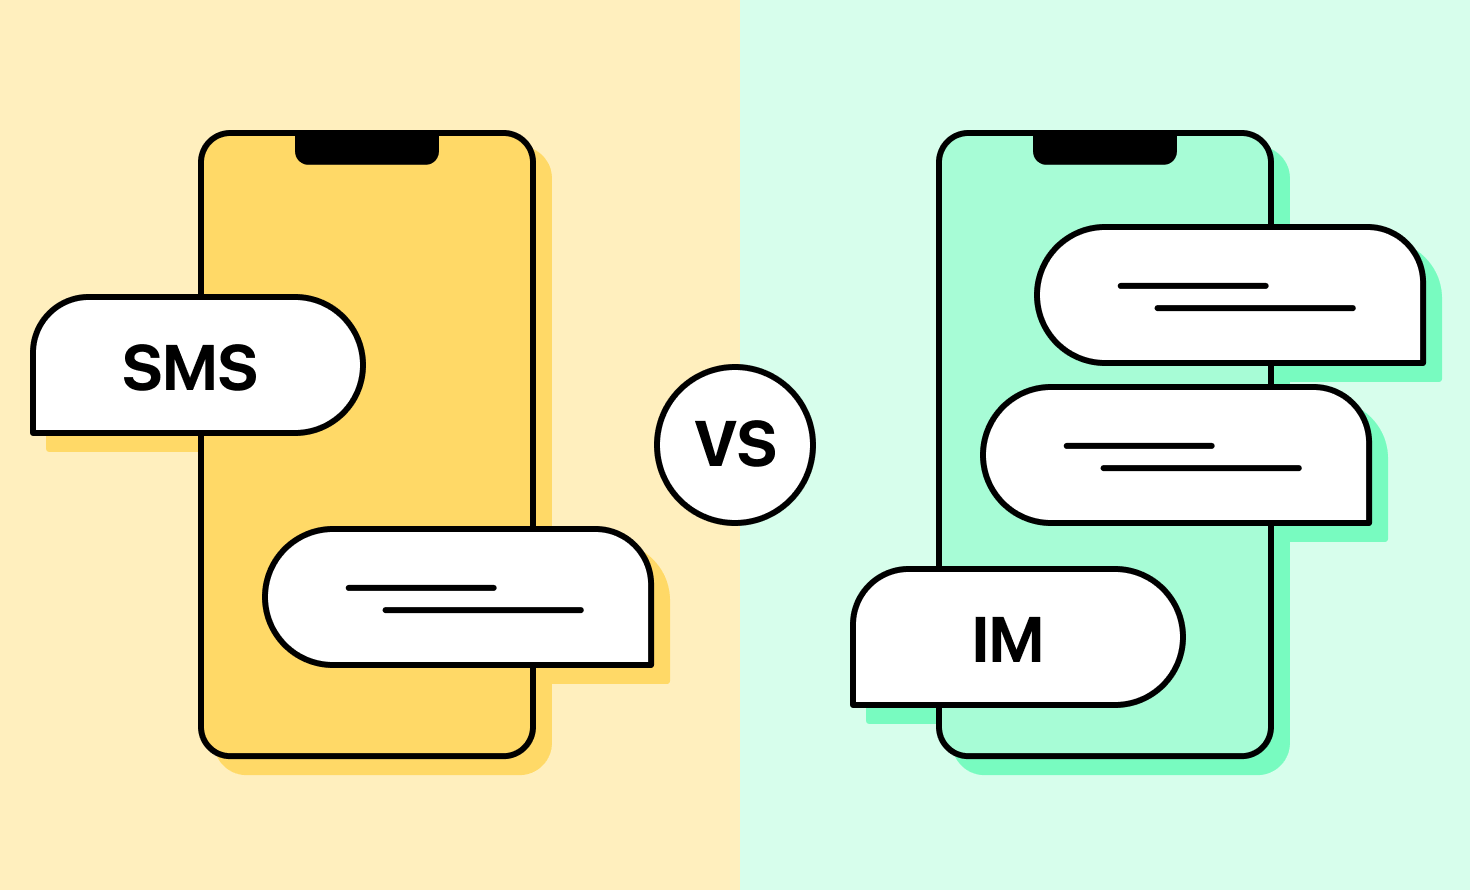 SMS vs IM illustration with two phone frames, one having chat bubble with text "SMS", another chat bubble with text "IM".